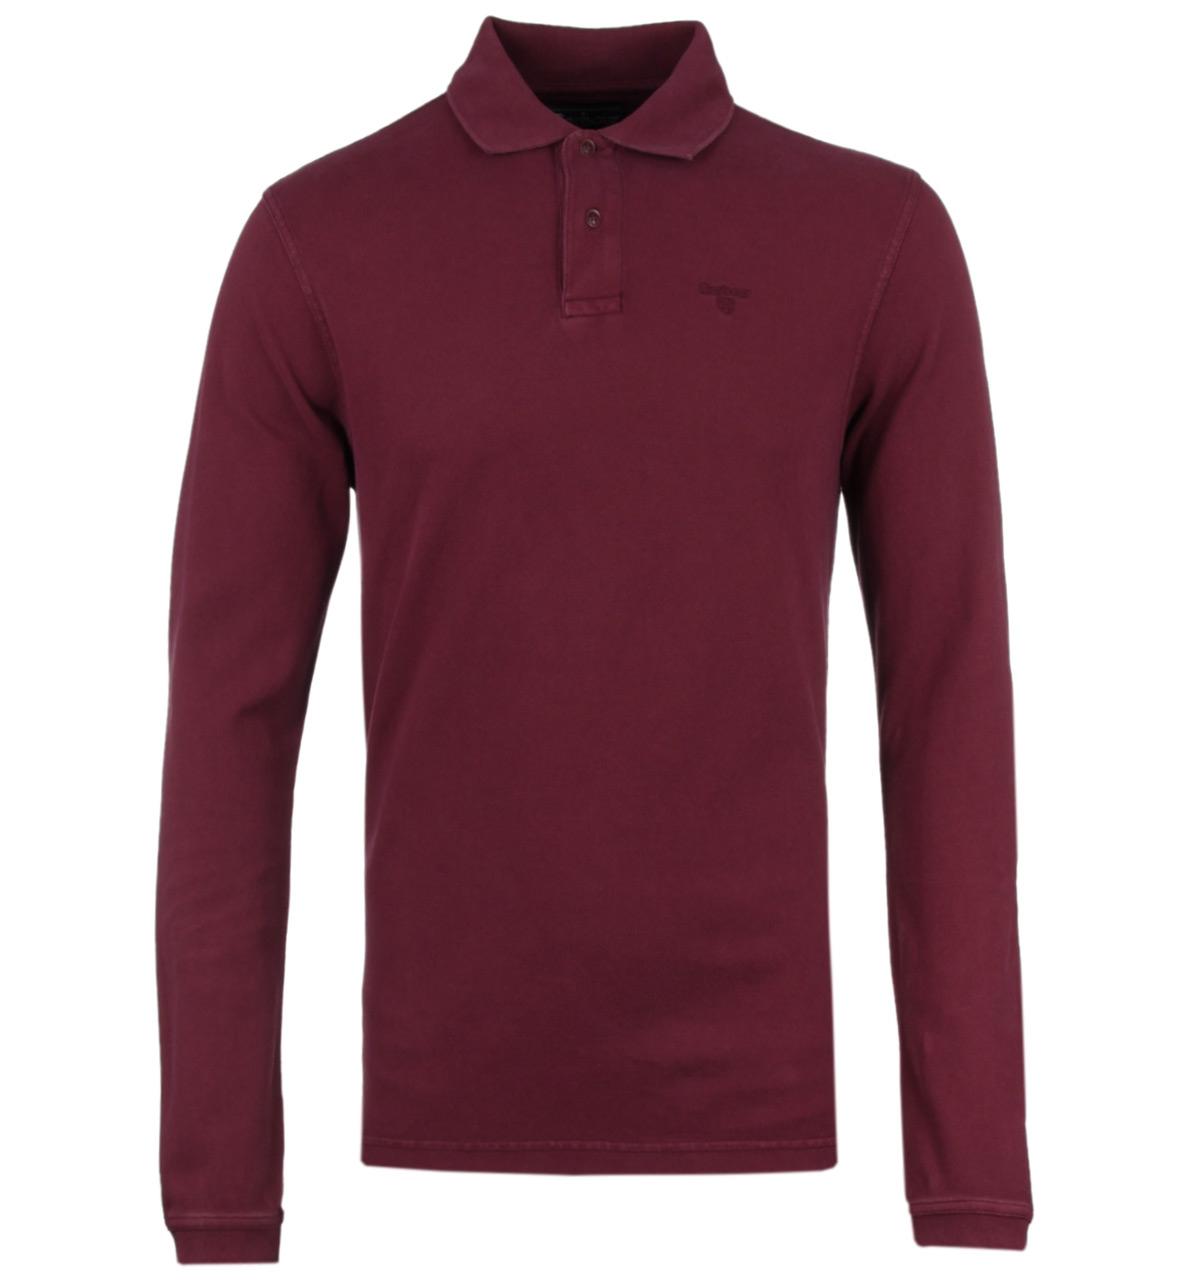 Lyst - Barbour Wine Red Long Sleeve Pique Cotton Polo Shirt in Red for Men